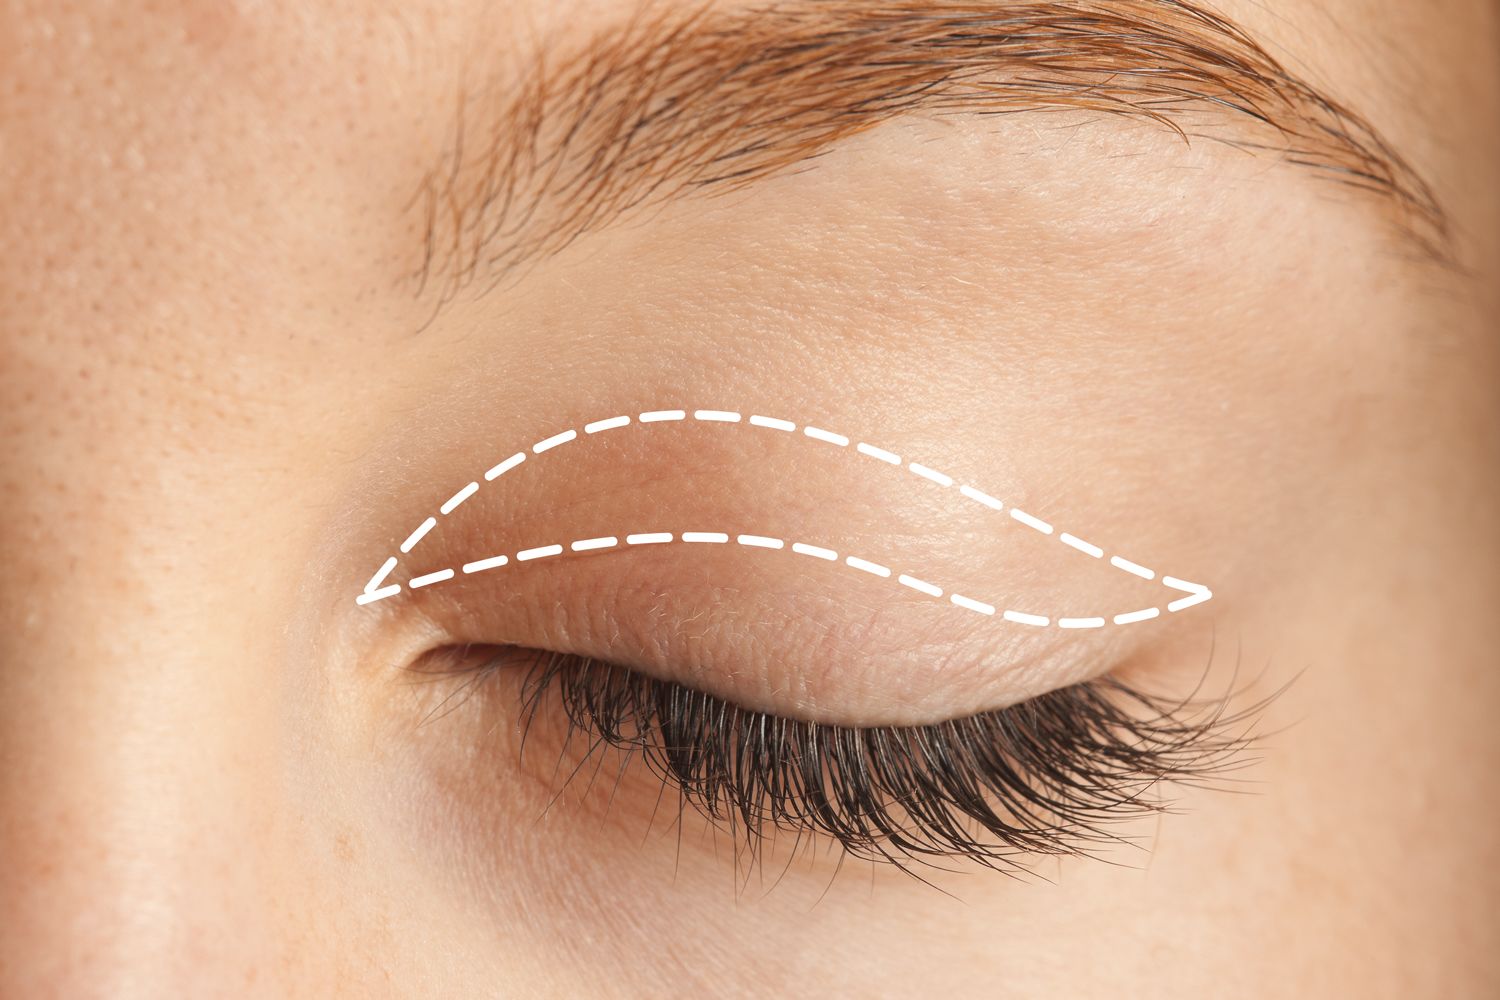 Incision marks for upper eyelid surgery